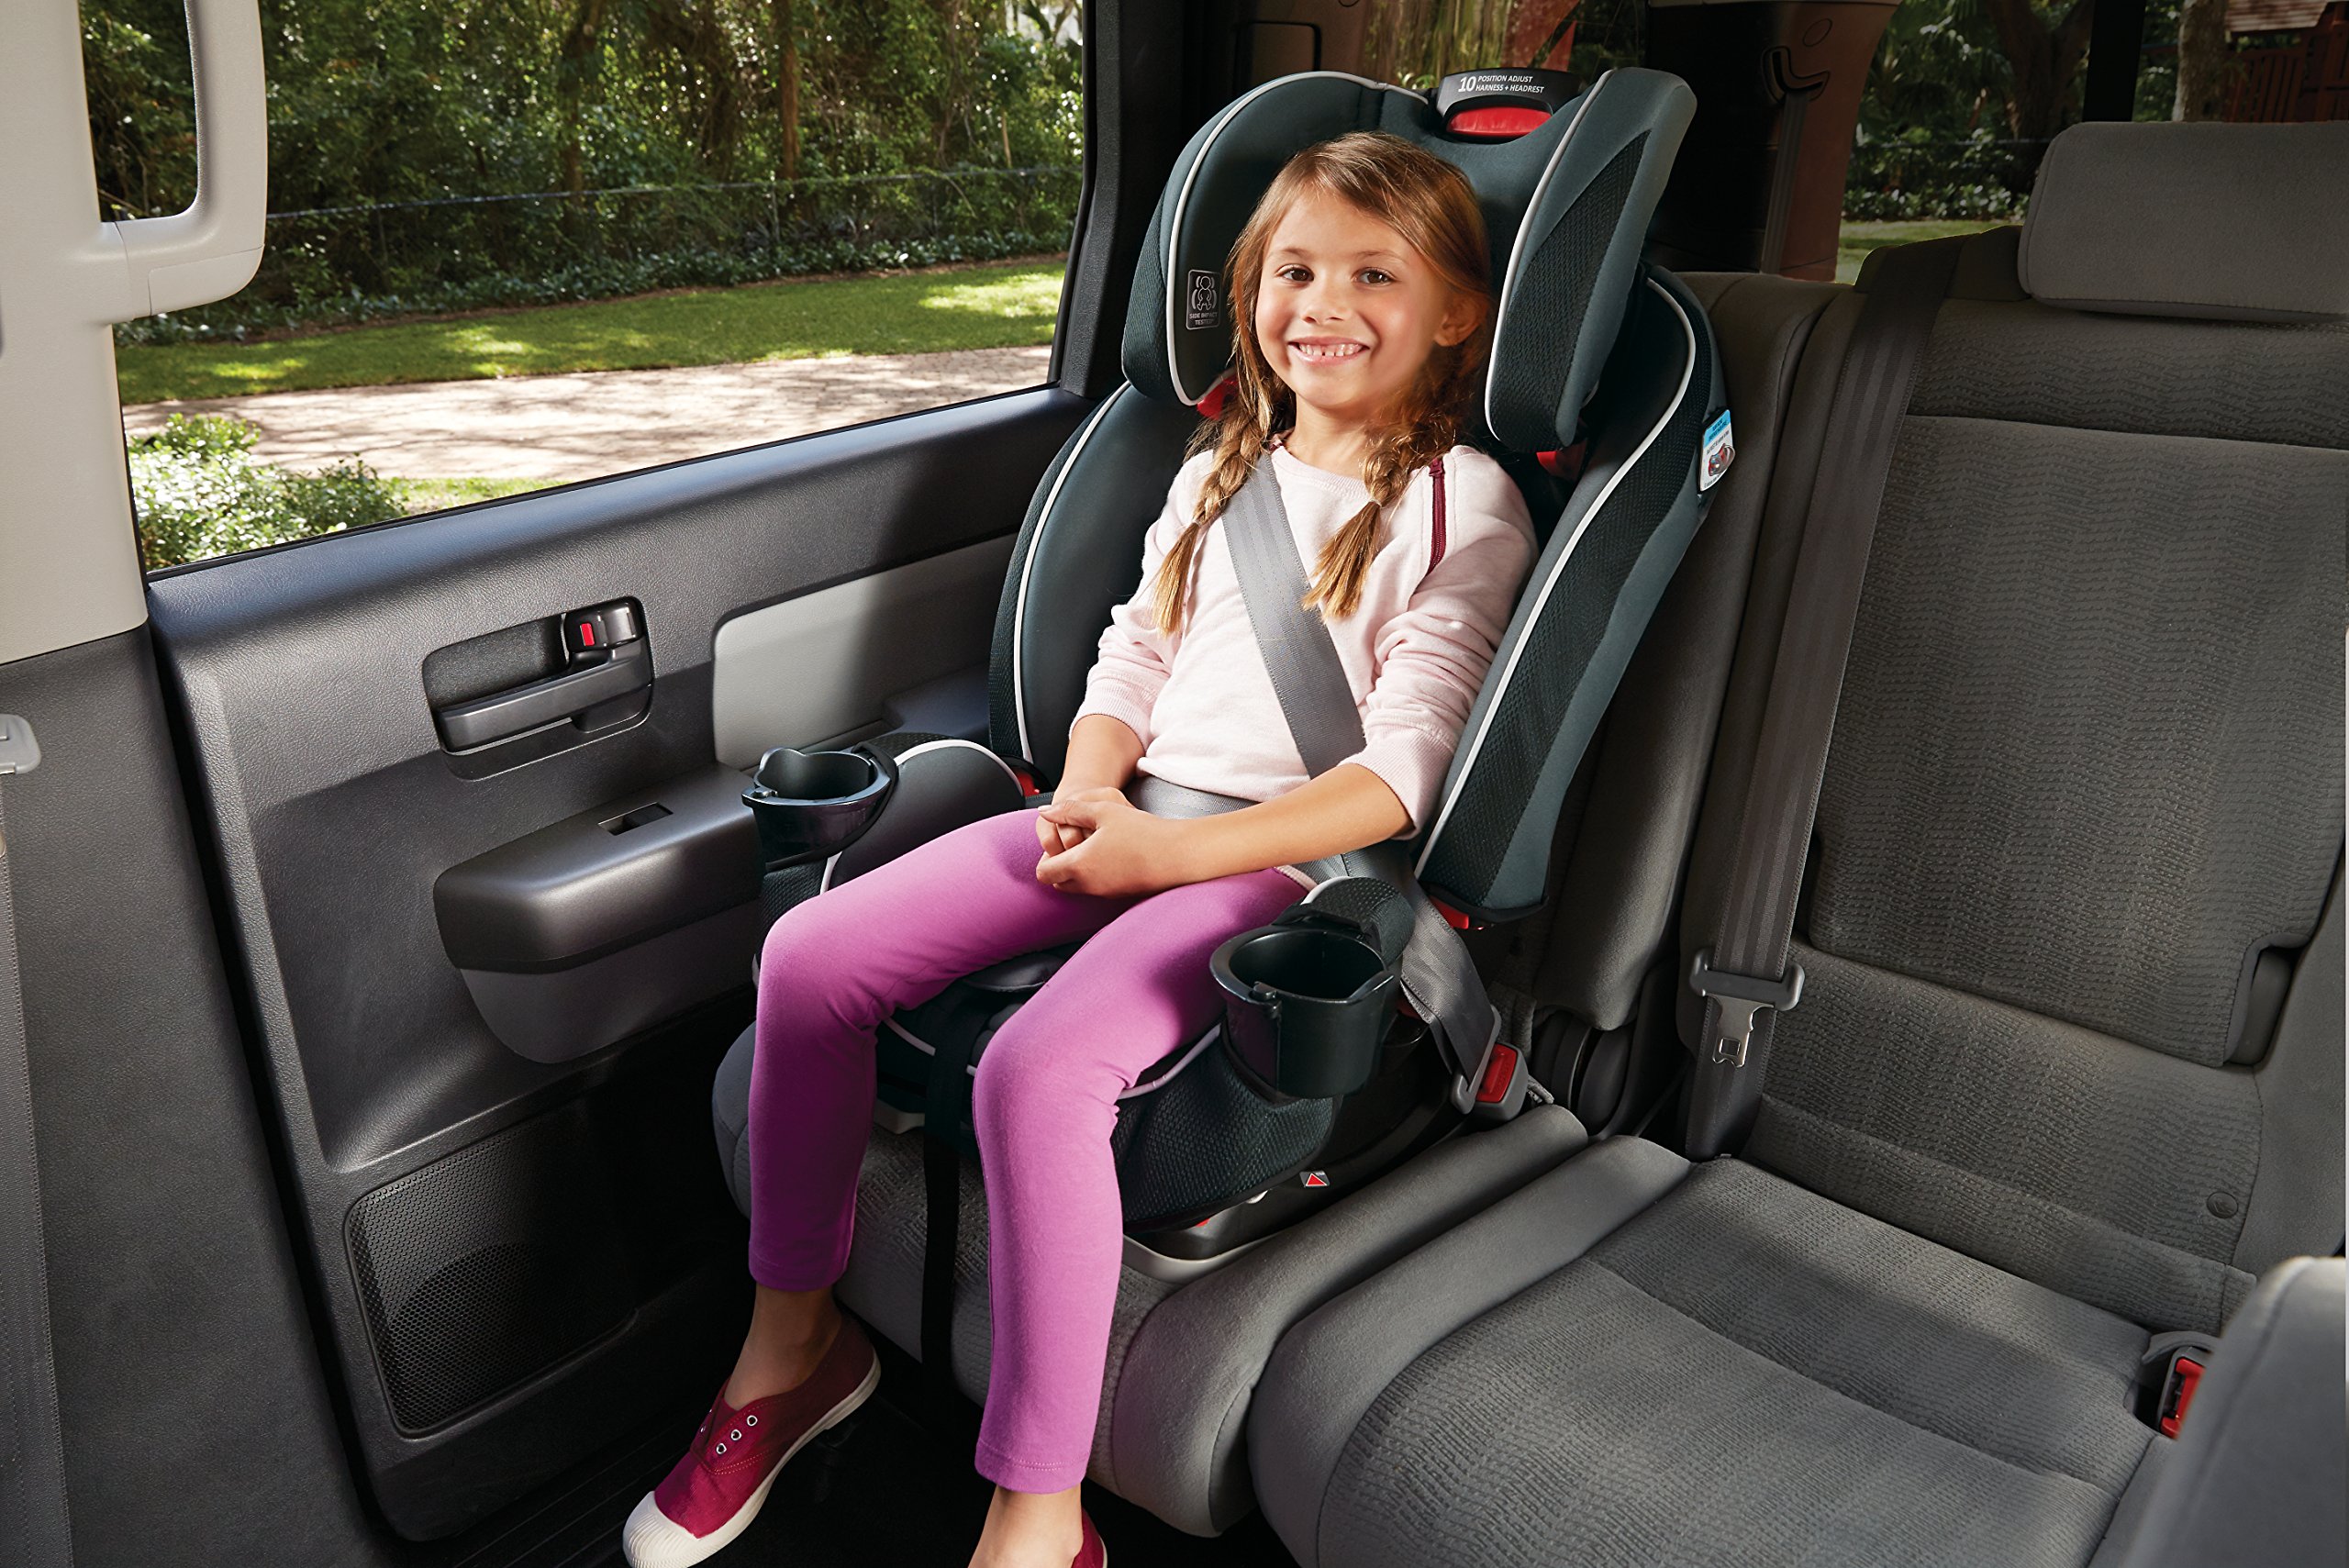 Graco Slimfit 3 in 1 Car Seat -Slim & Comfy Design Saves Space in Your Back Seat, Darcie, One Size